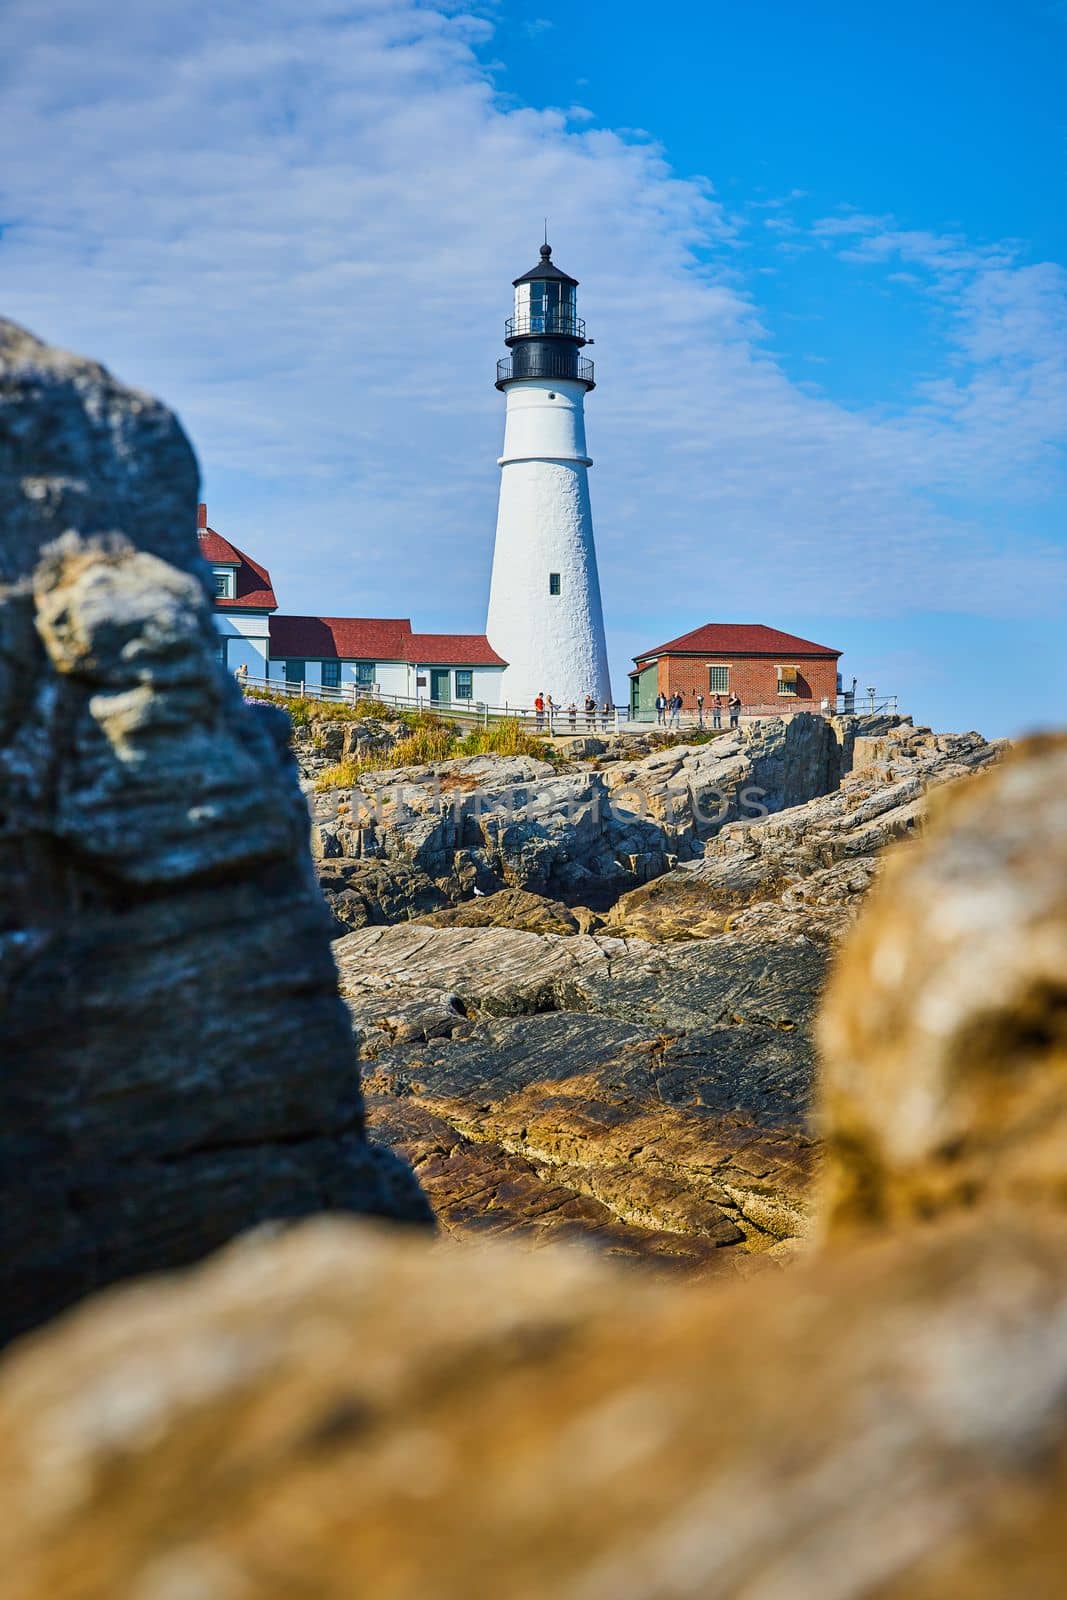 Lighthouse in Maine through soft focused rocks by njproductions